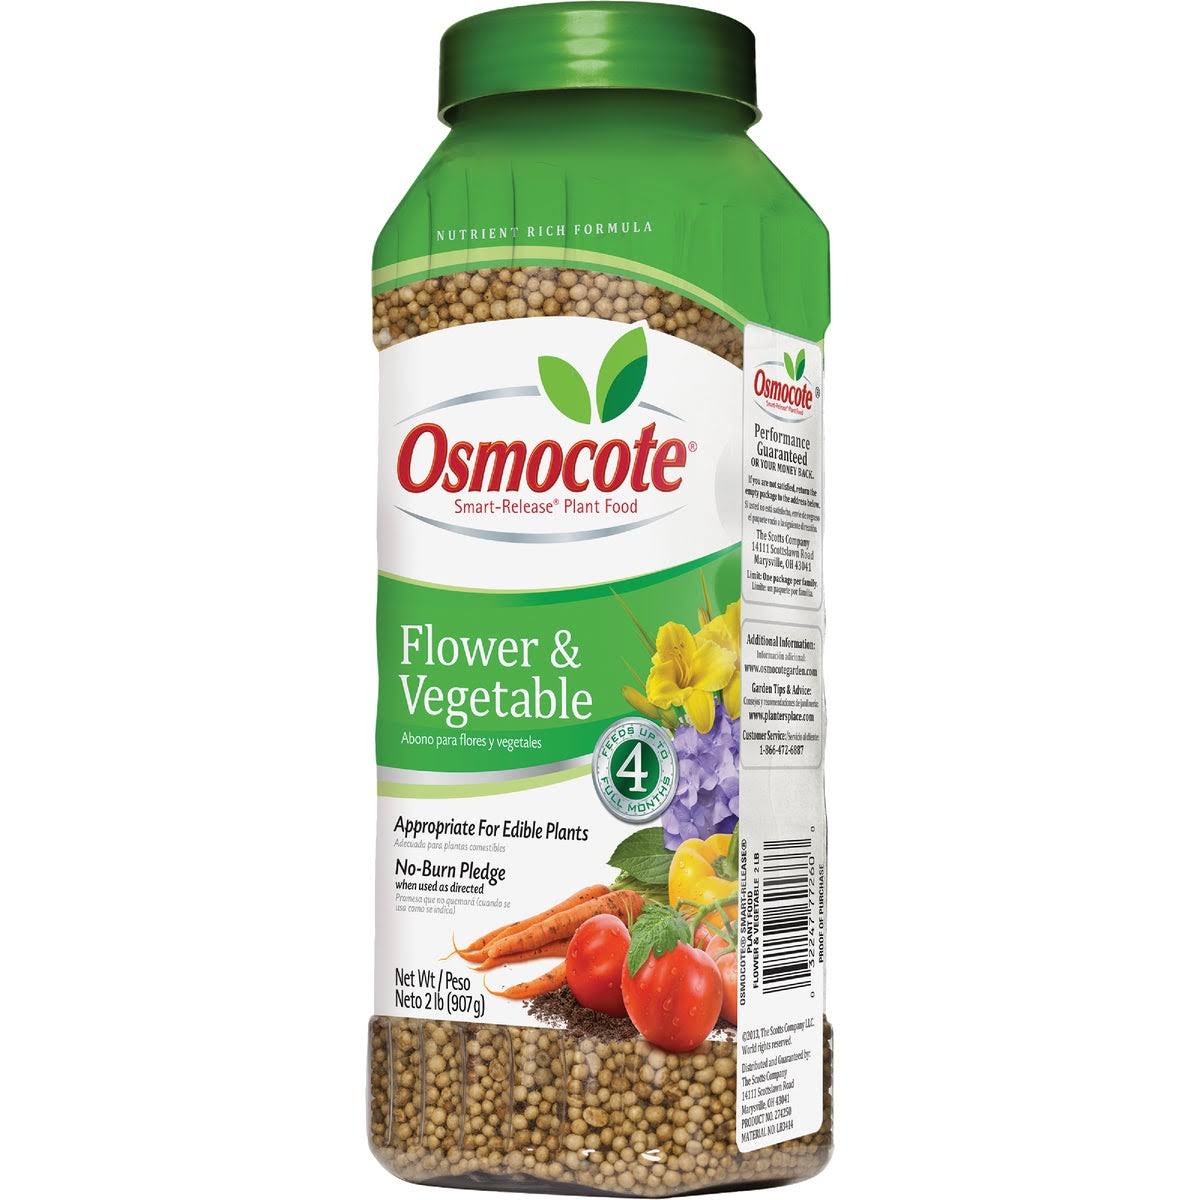 Osmocote Flower and Vegetable Smart Release Plant Food - 2lbs